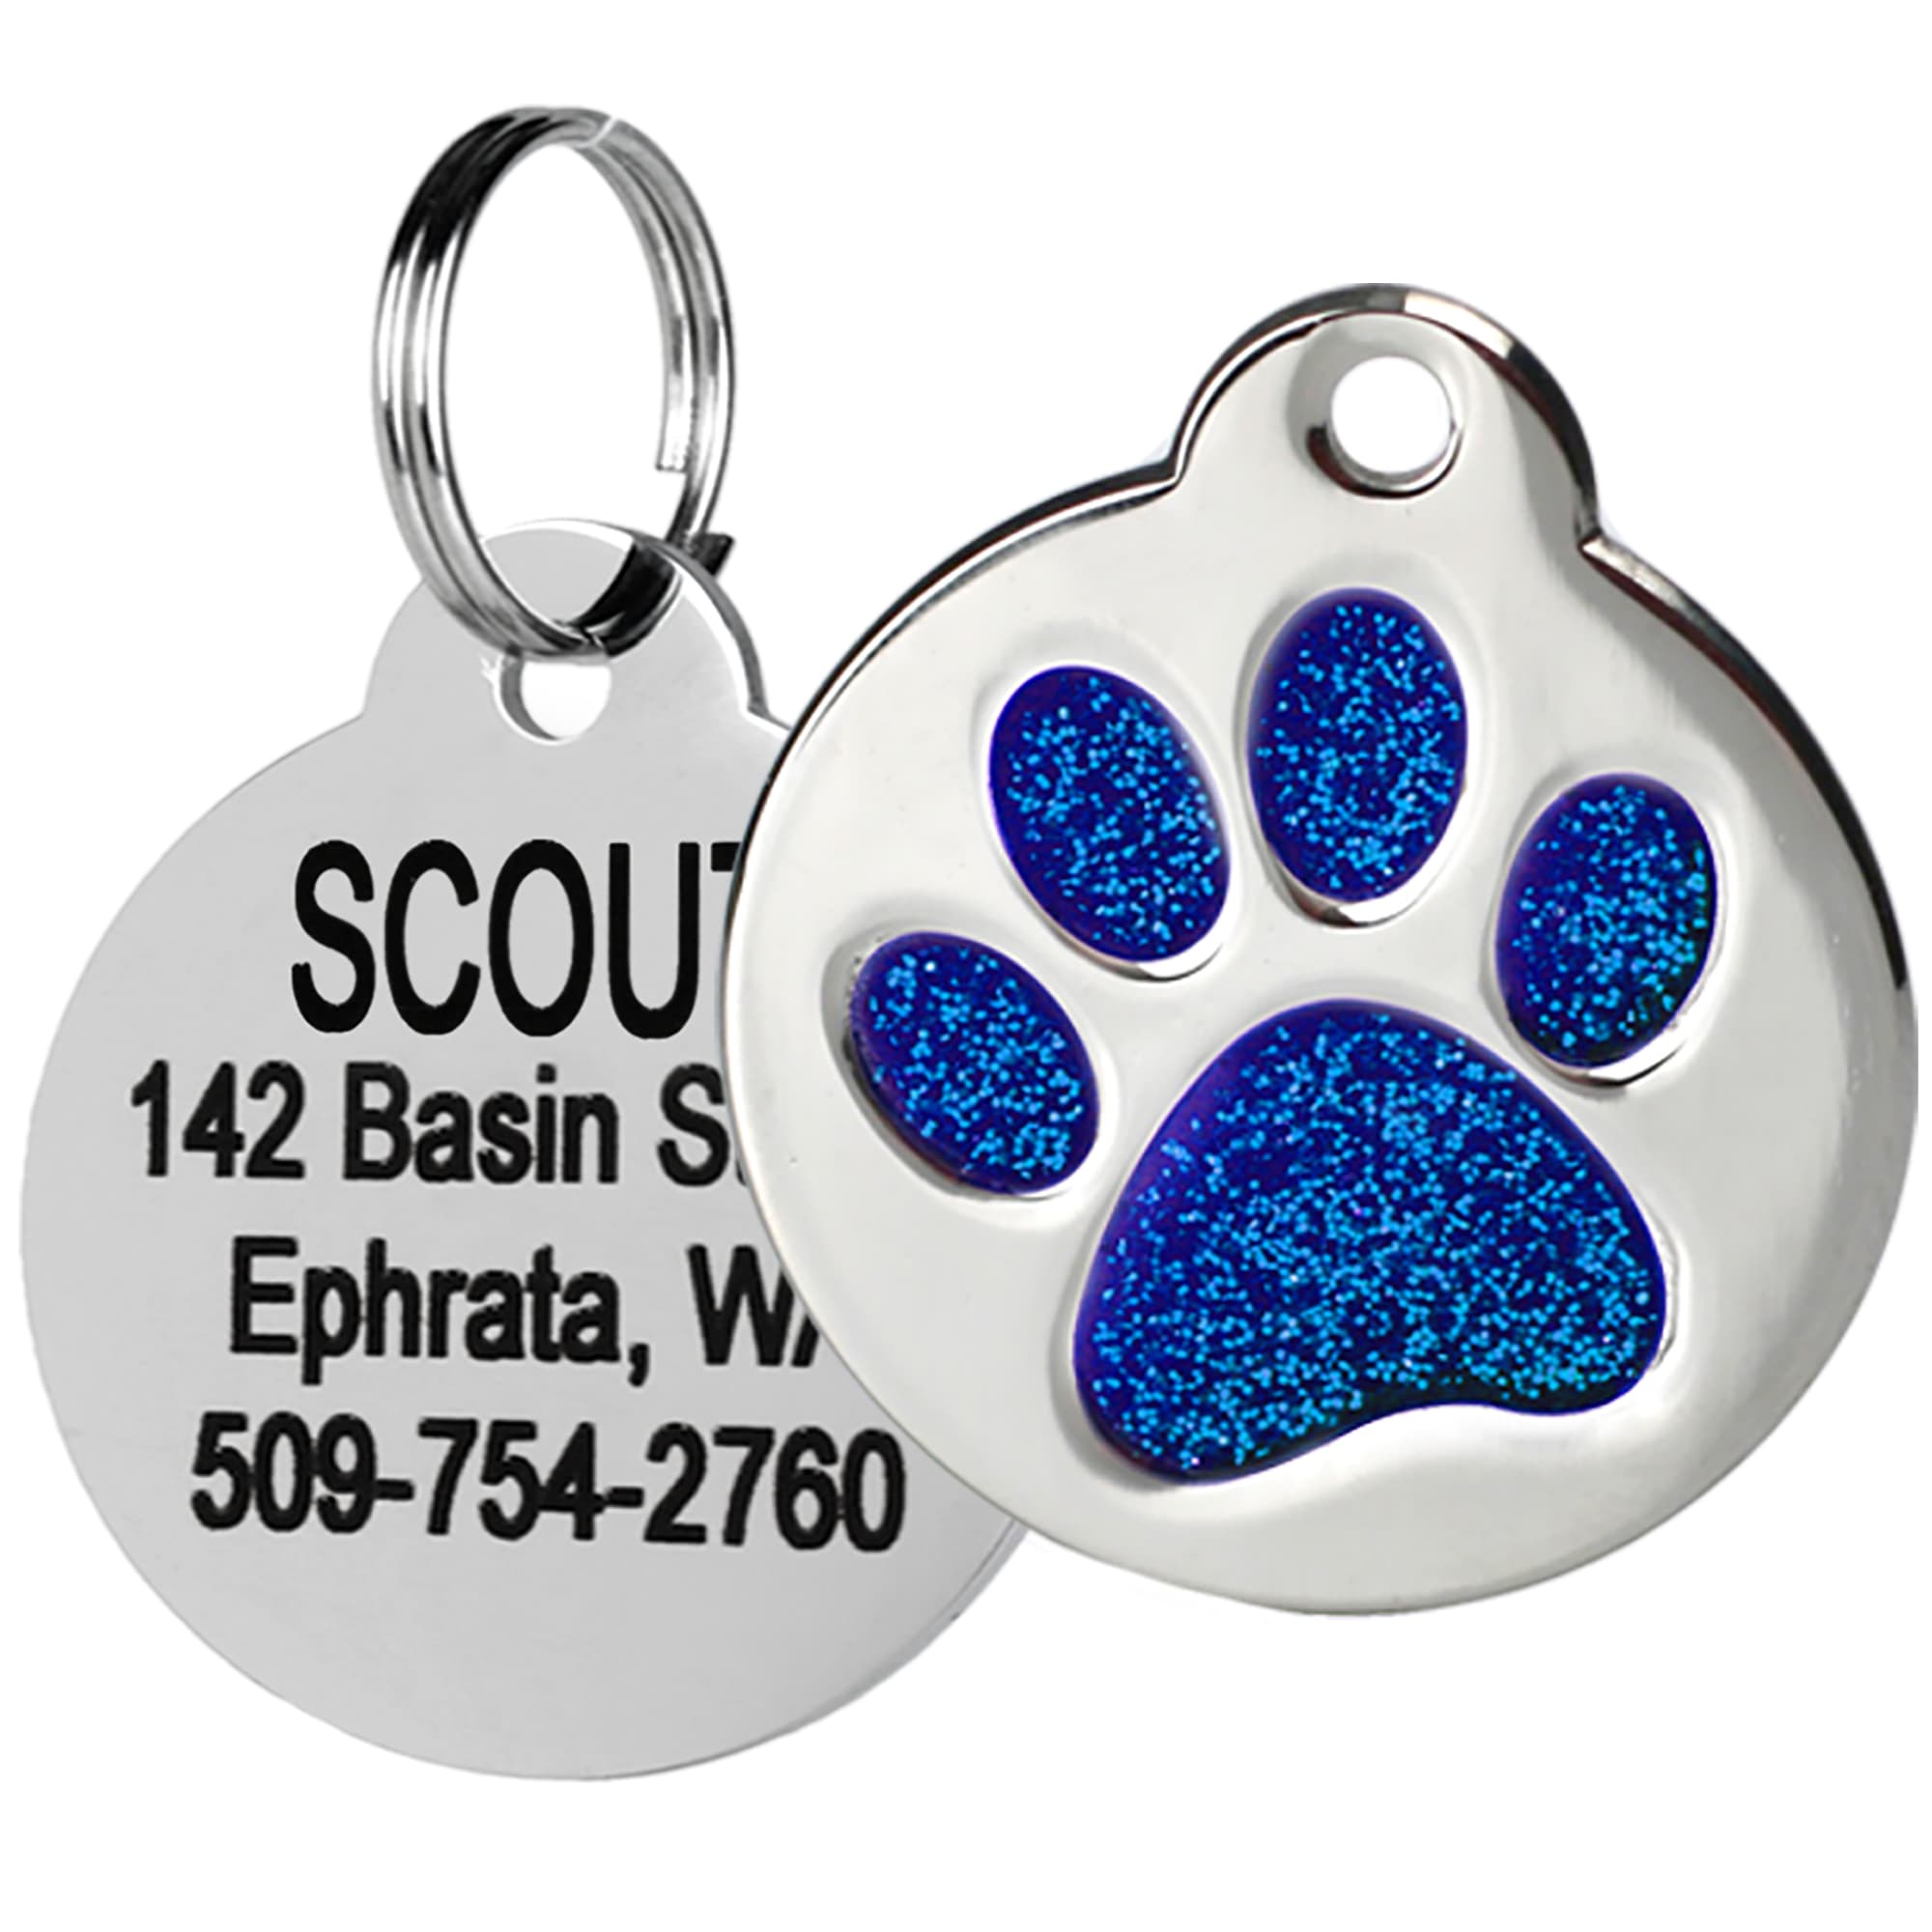 TagWorks Hello My Name Is Personalized Pet ID Tag in Blue | Plastic PetSmart